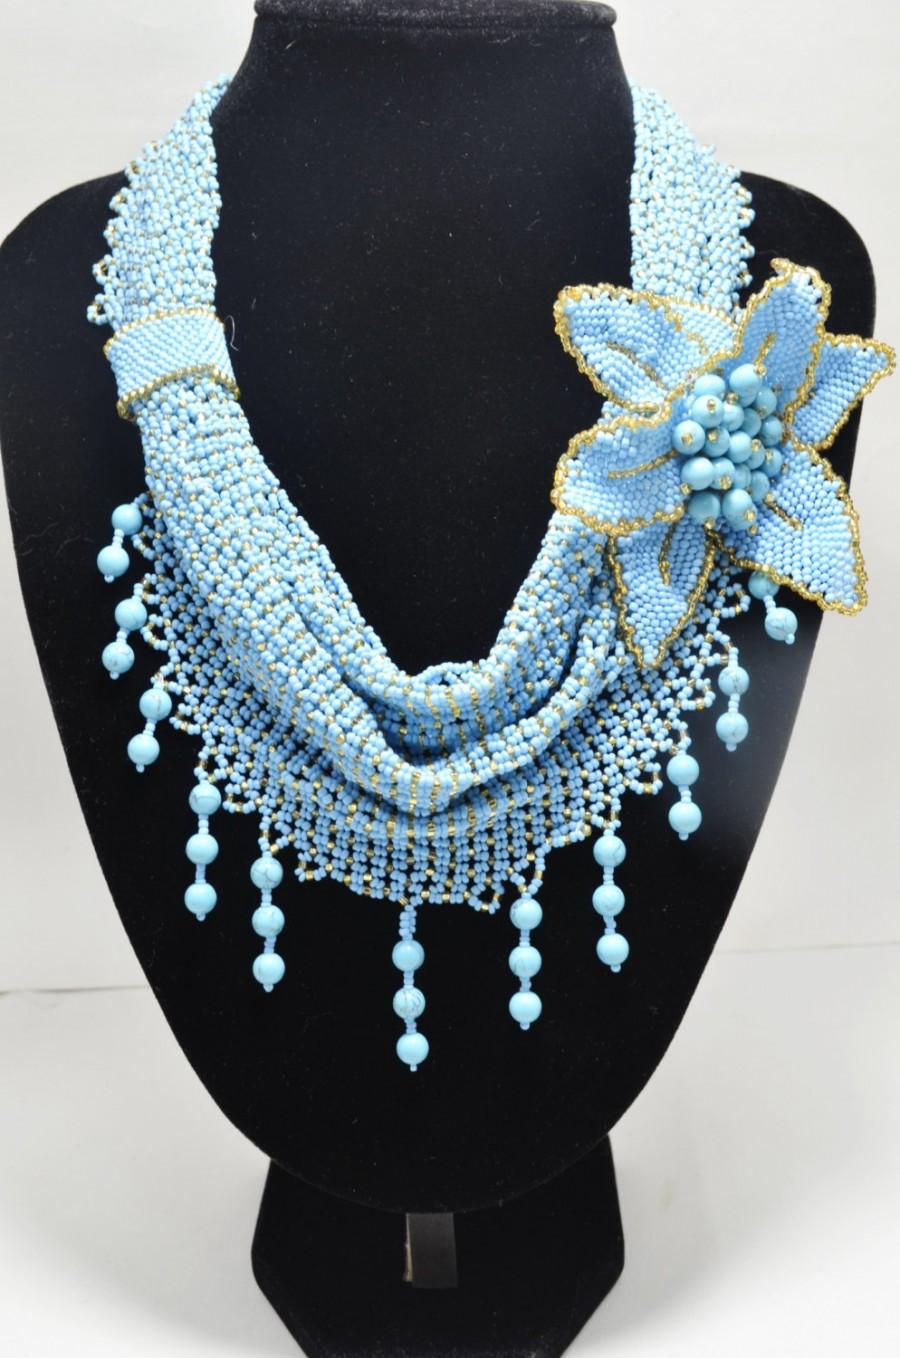 Mariage - Turquoise Statement Beaded Scarf Necklace with Flower Brooch, Beading Holiday Necklace, Fashion Seed Bead Jewelry, Christmas Gift for Her